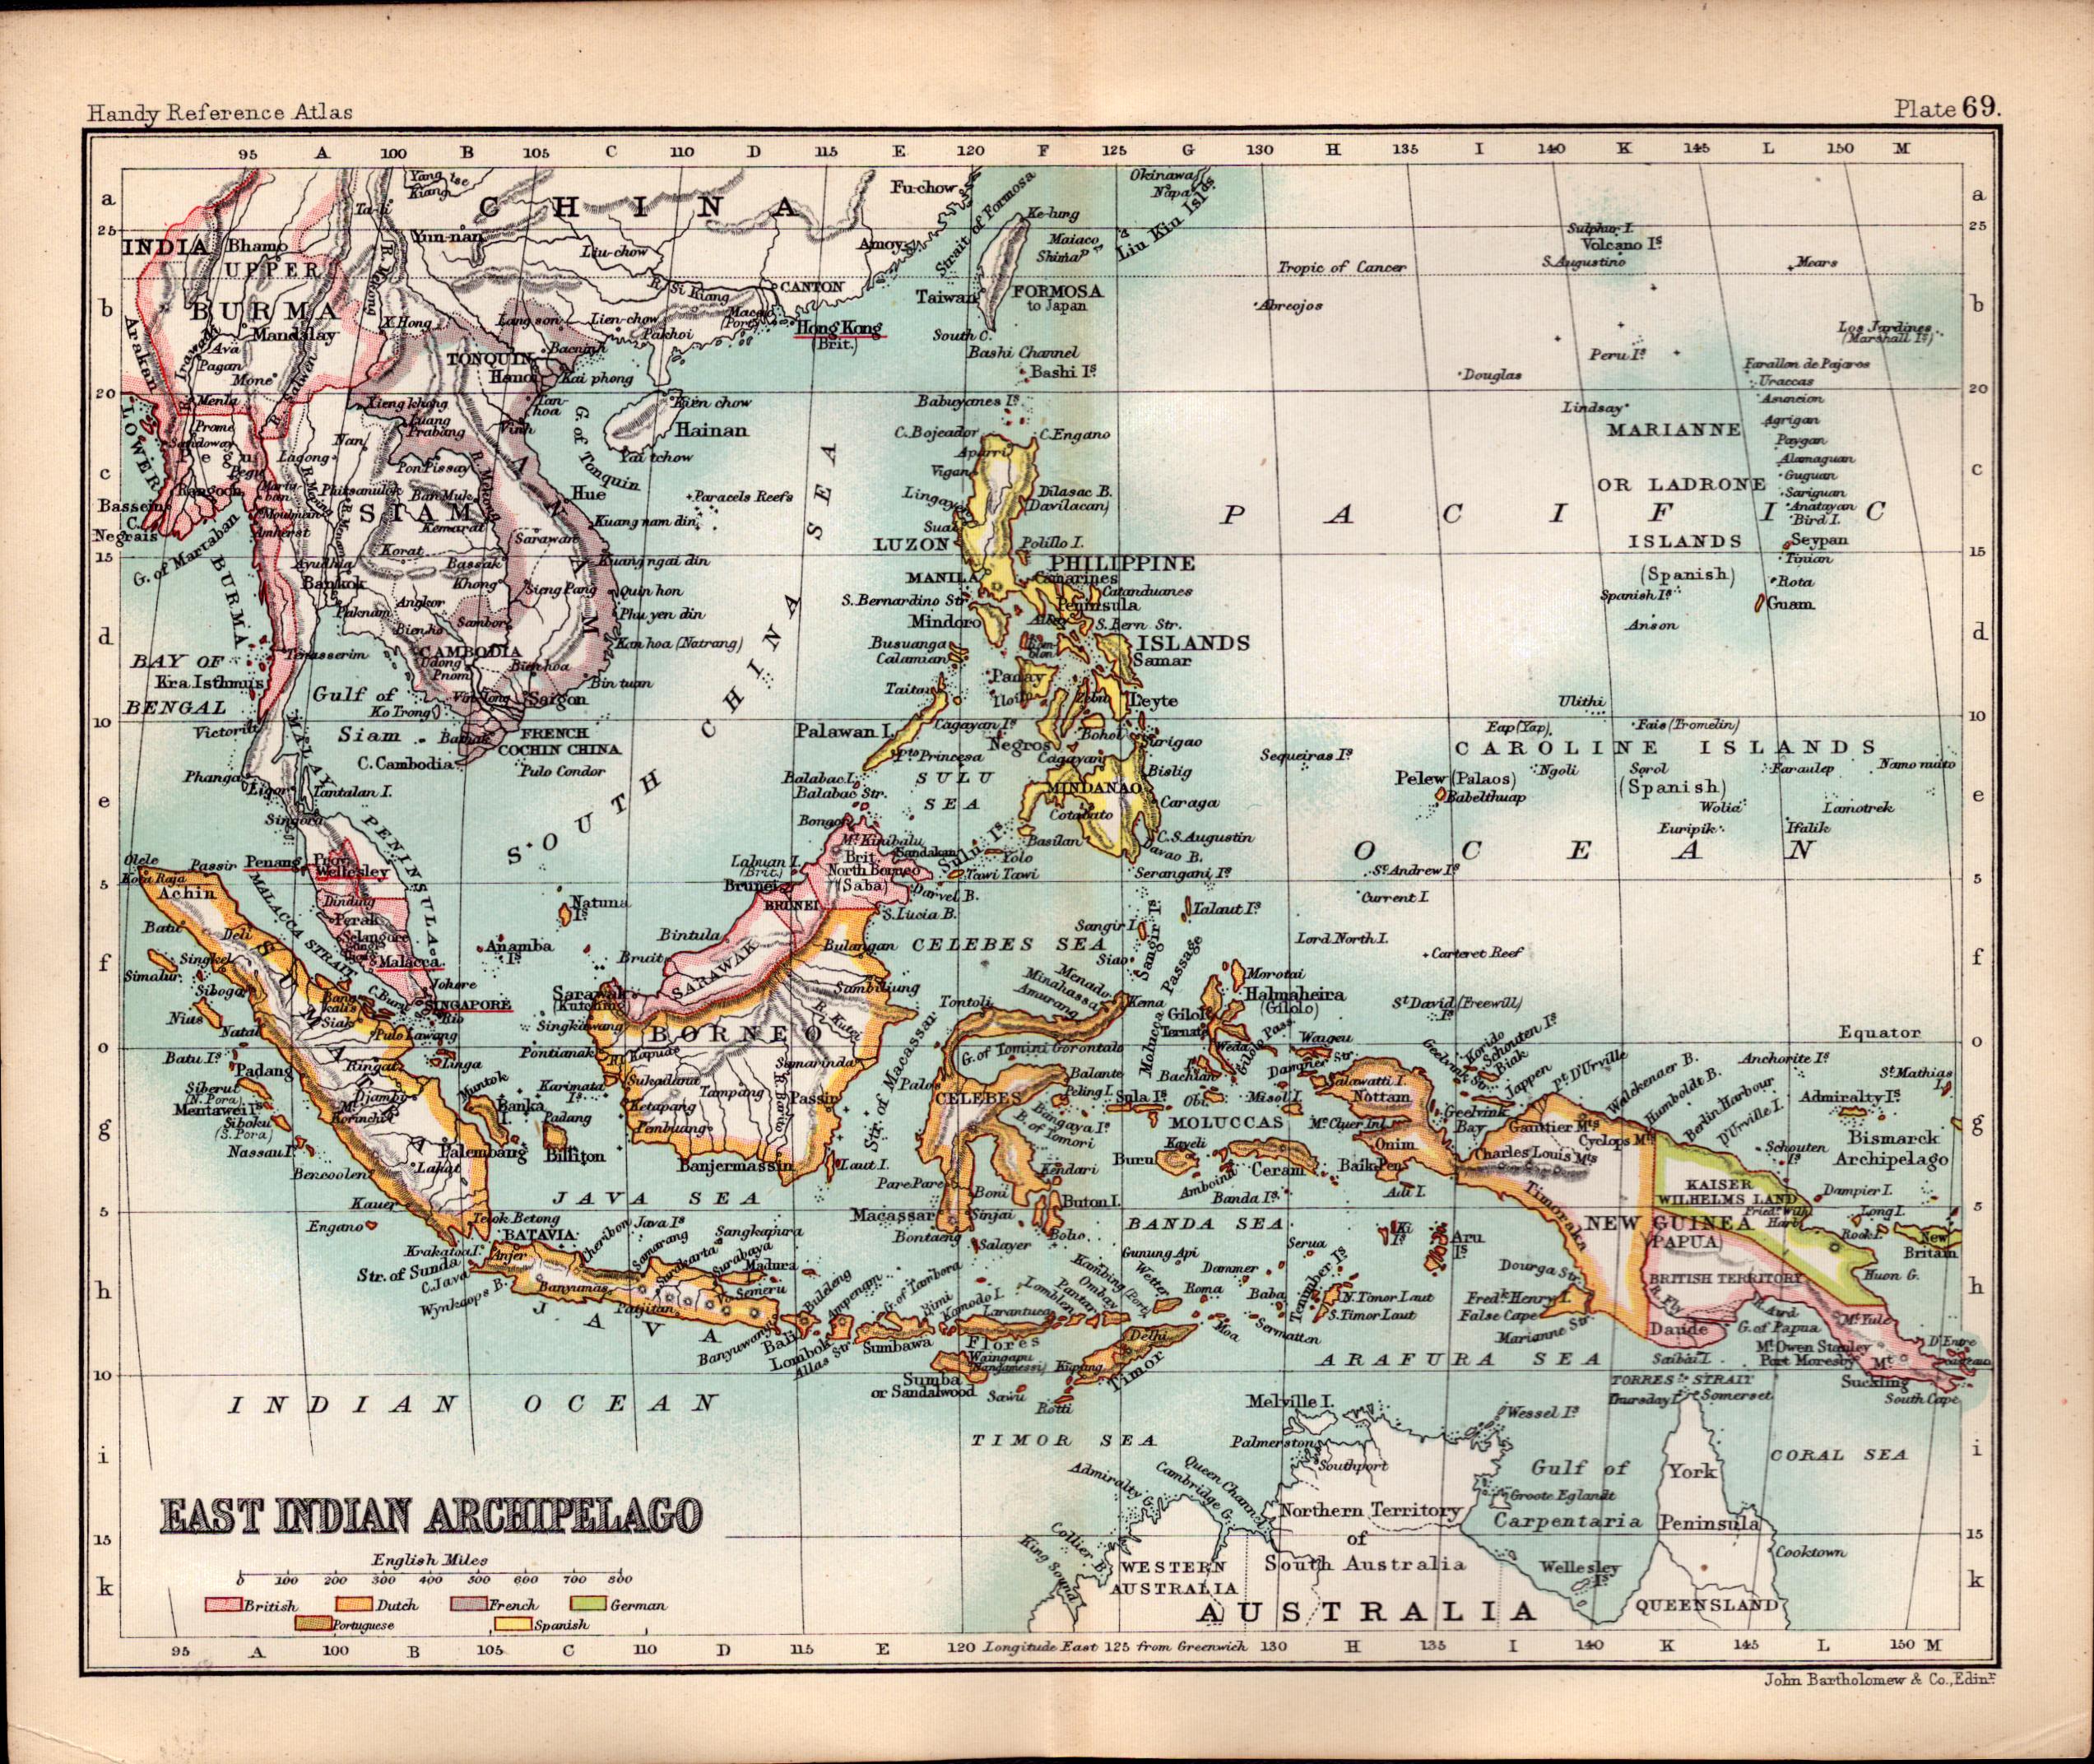 East Indian Archipelago Double Sided Victorian Antique 1896 Map.